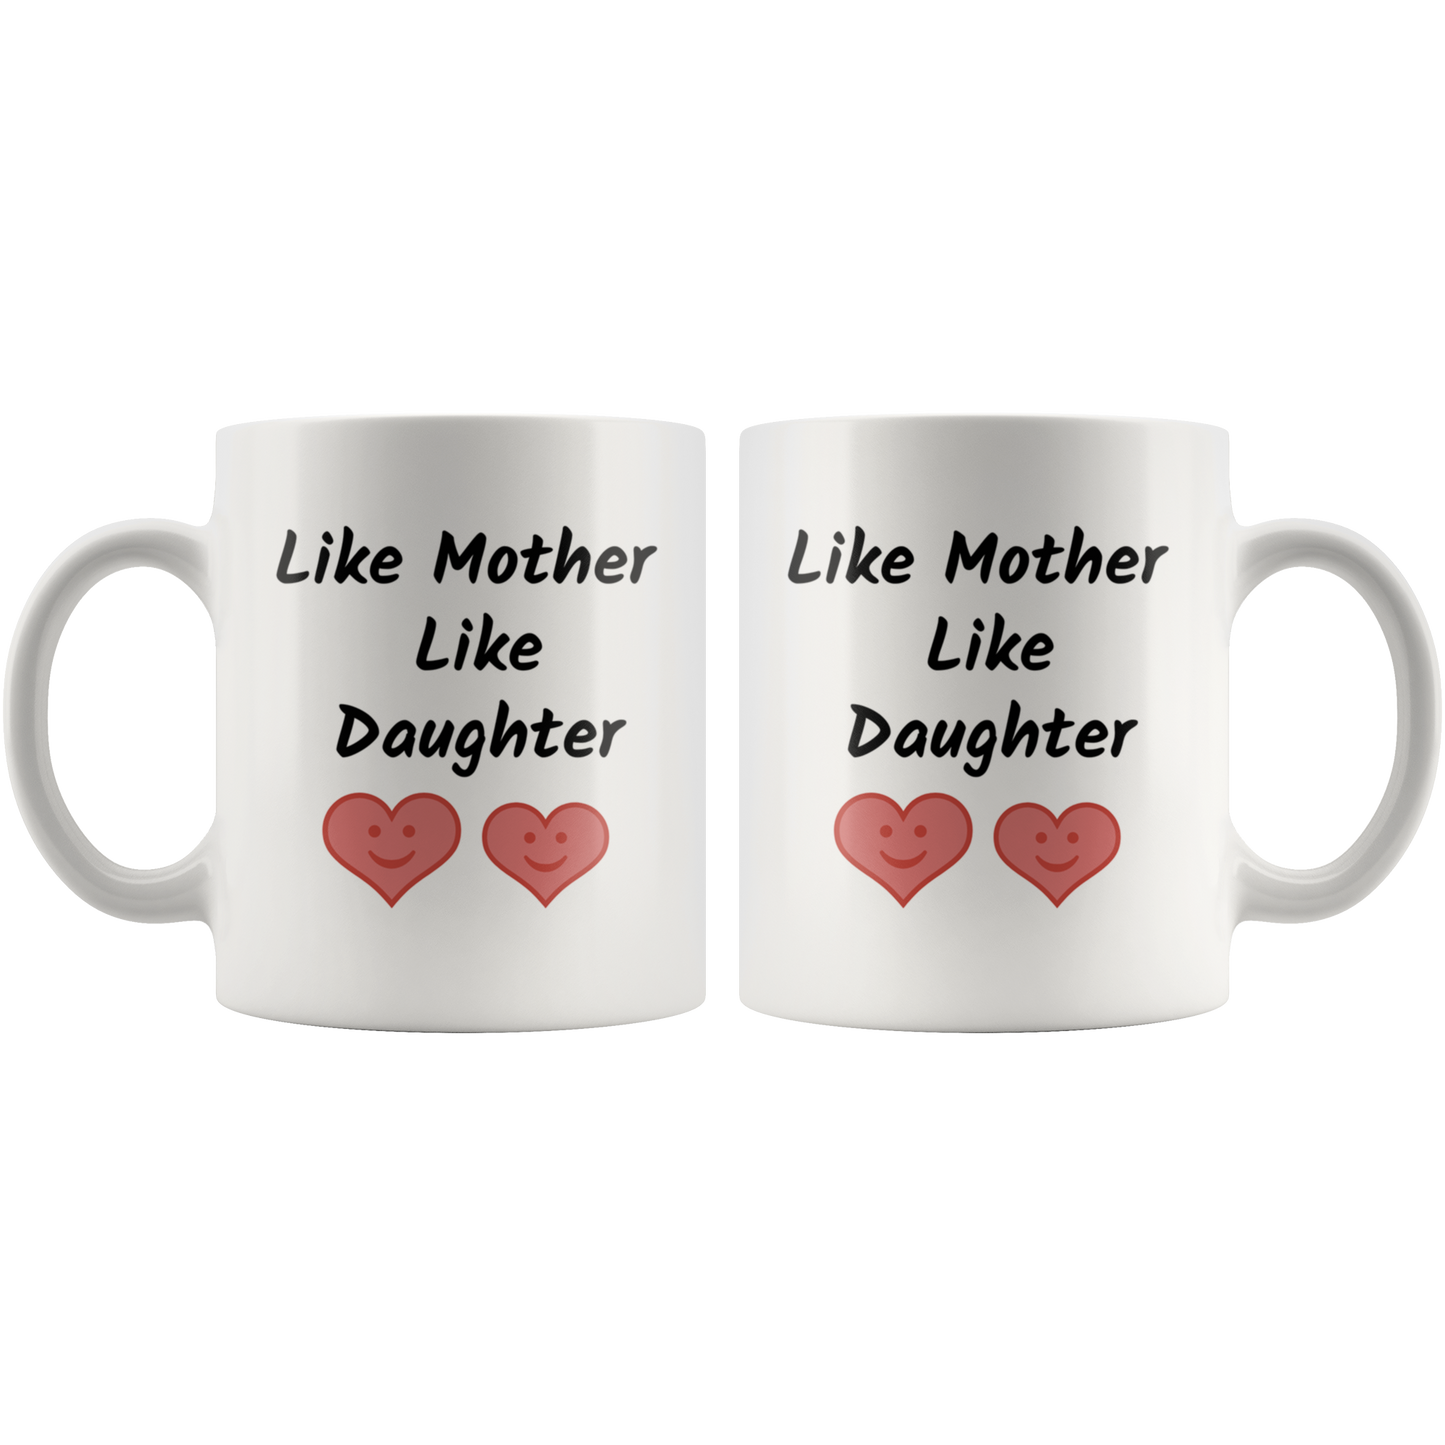 Like Mother Like Daughter Funny Coffee Mug Gift for Mother and Daughter Coffee Lovers